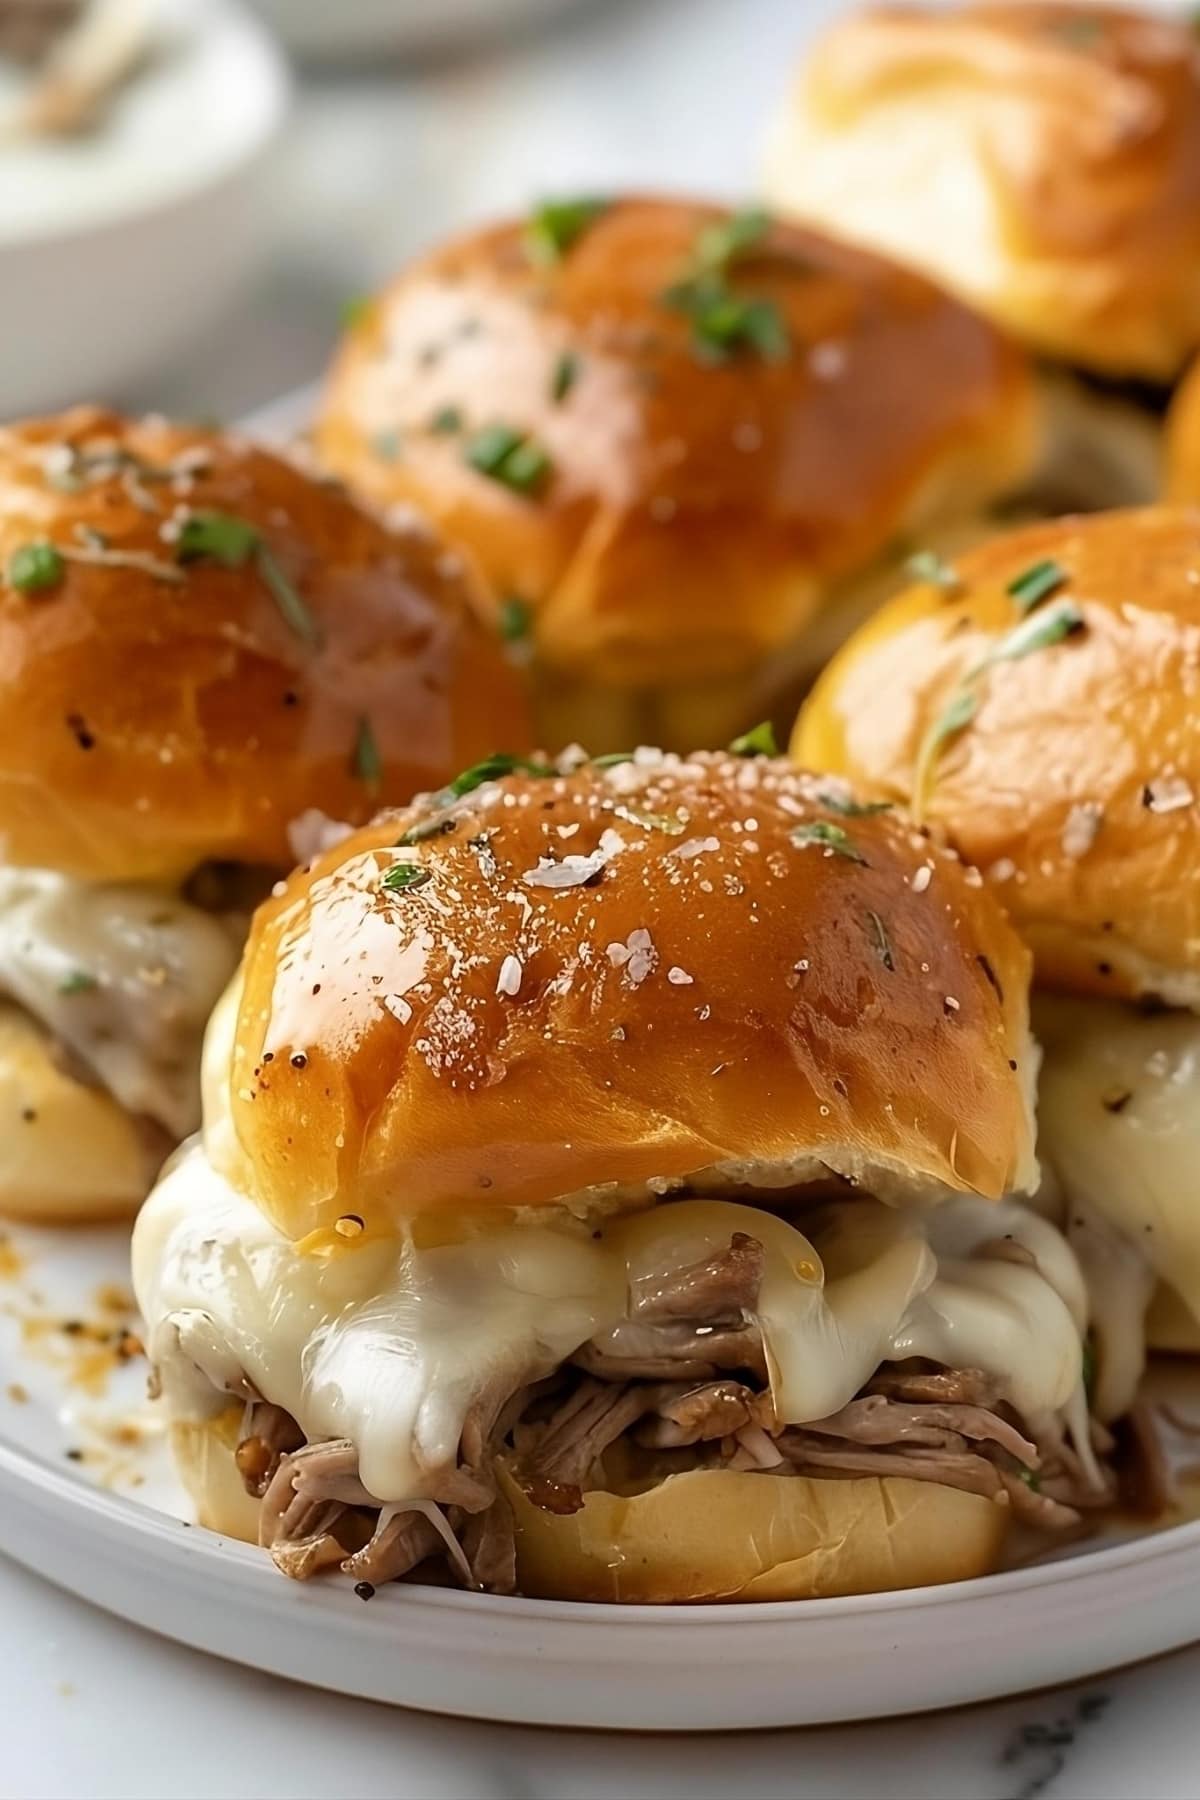 Philly Cheesesteak Sliders with melted cheese and shredded rib eye steak filling served on a white plate.